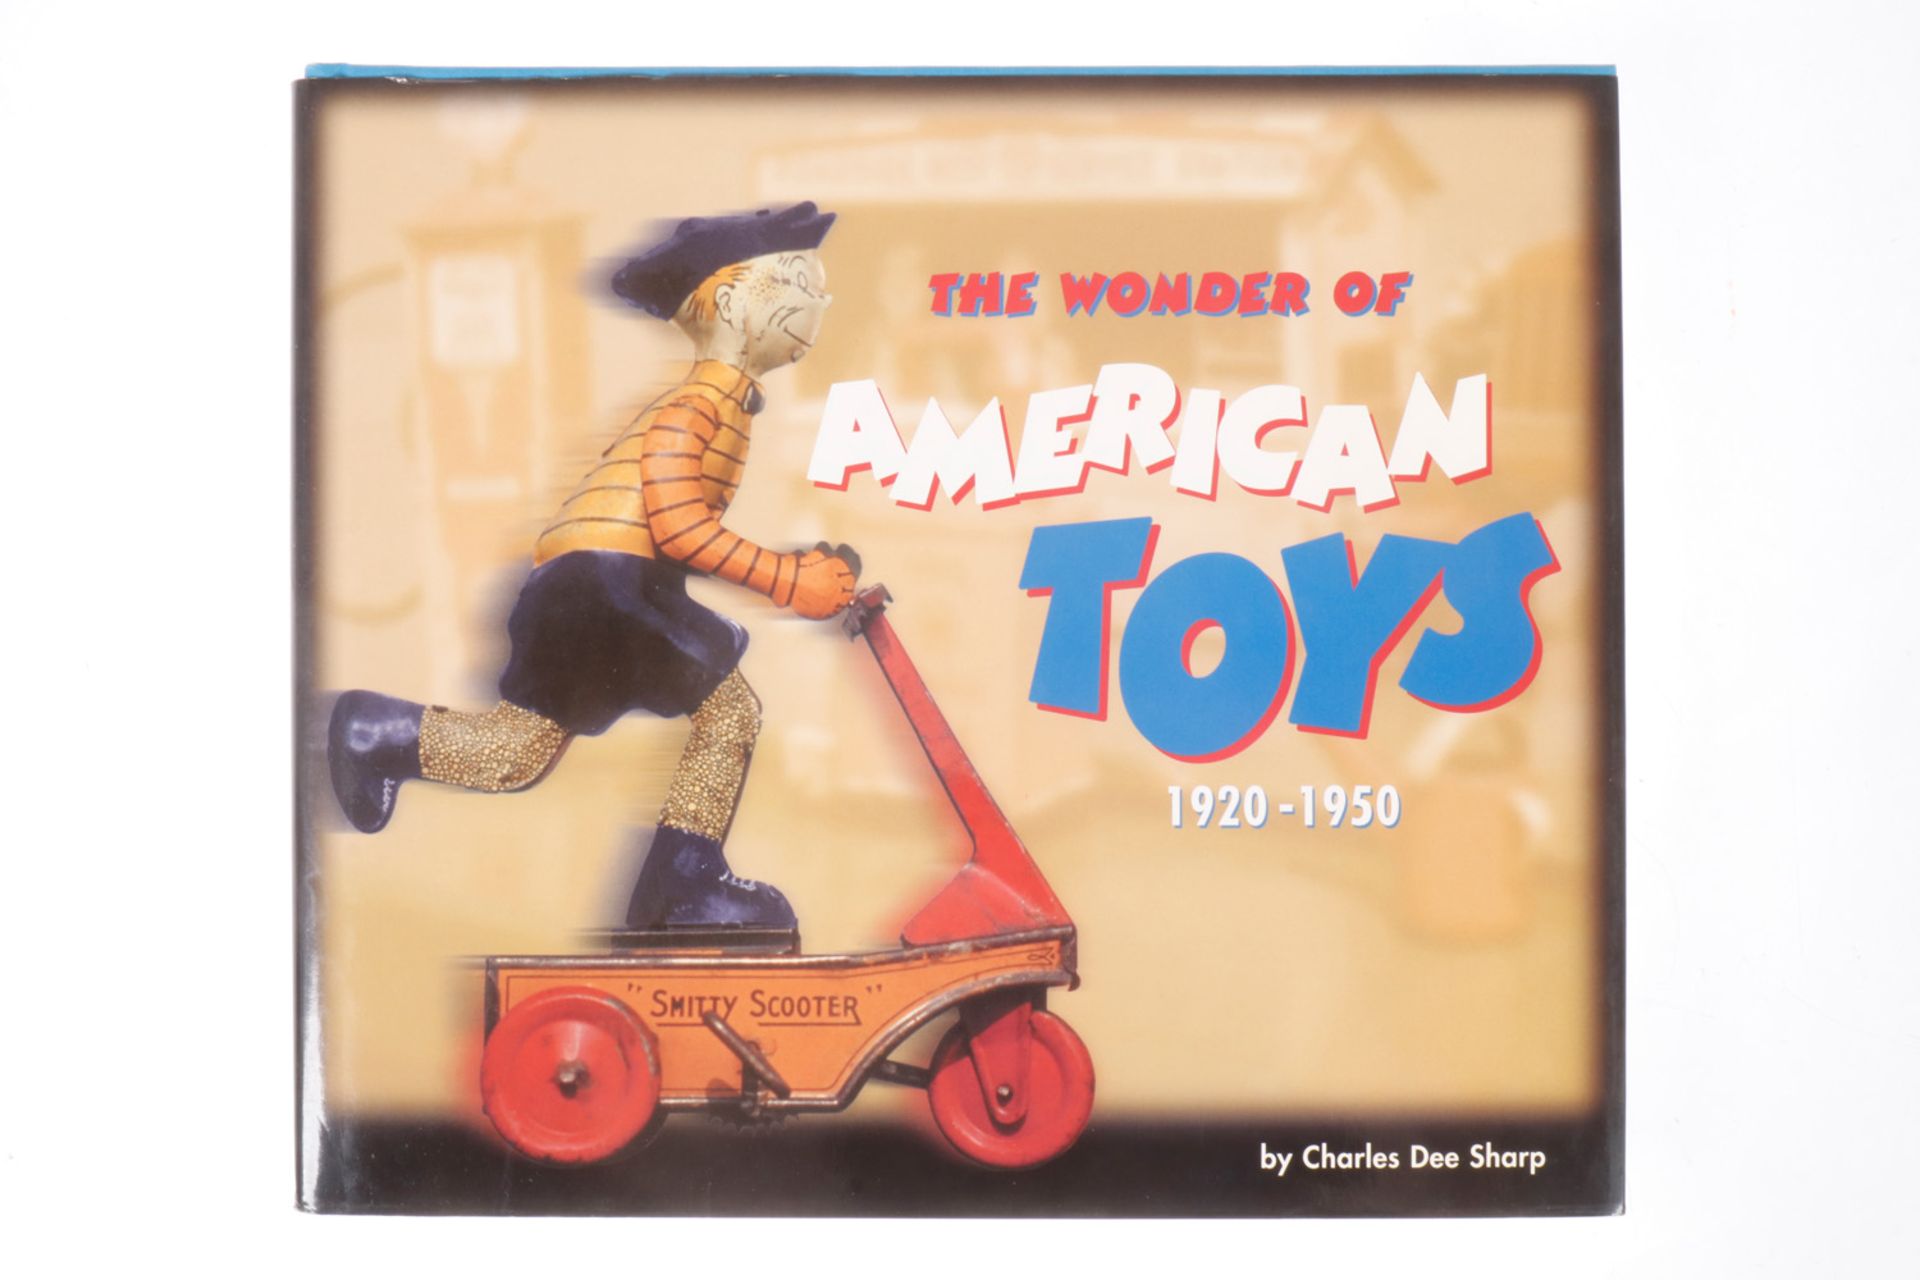 Buch "The Wonder of American Toys 1920-1950", Alterungsspuren Buch "The Wonder of American Toys